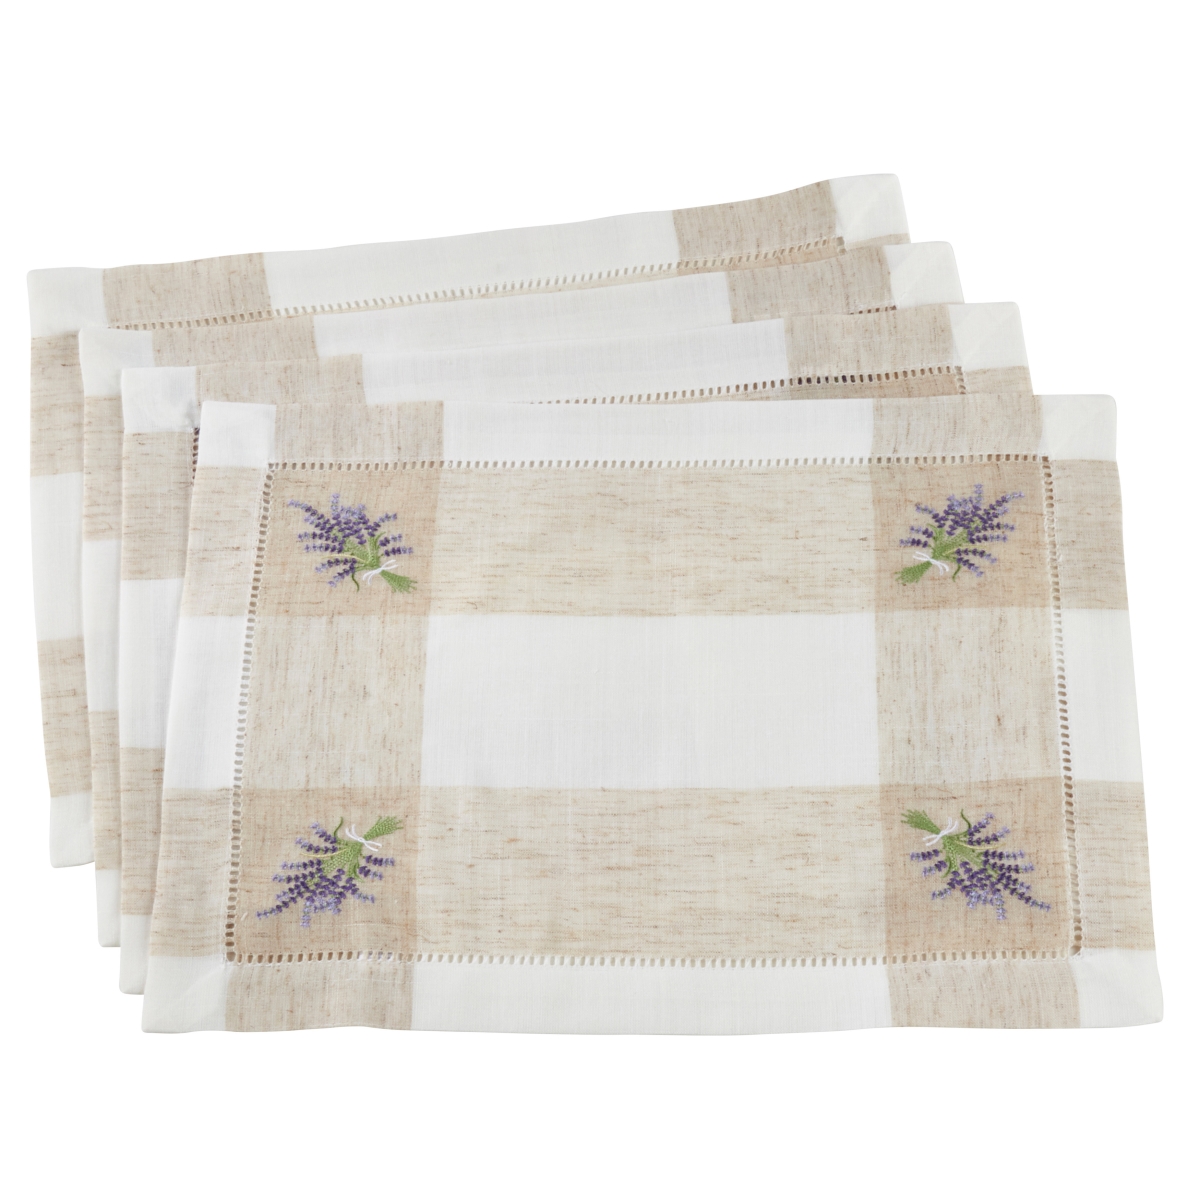 Picture of SARO 2234.I1419B Hemstitch Placemats with Embroidered Lavender Design  Ivory - Set of 4